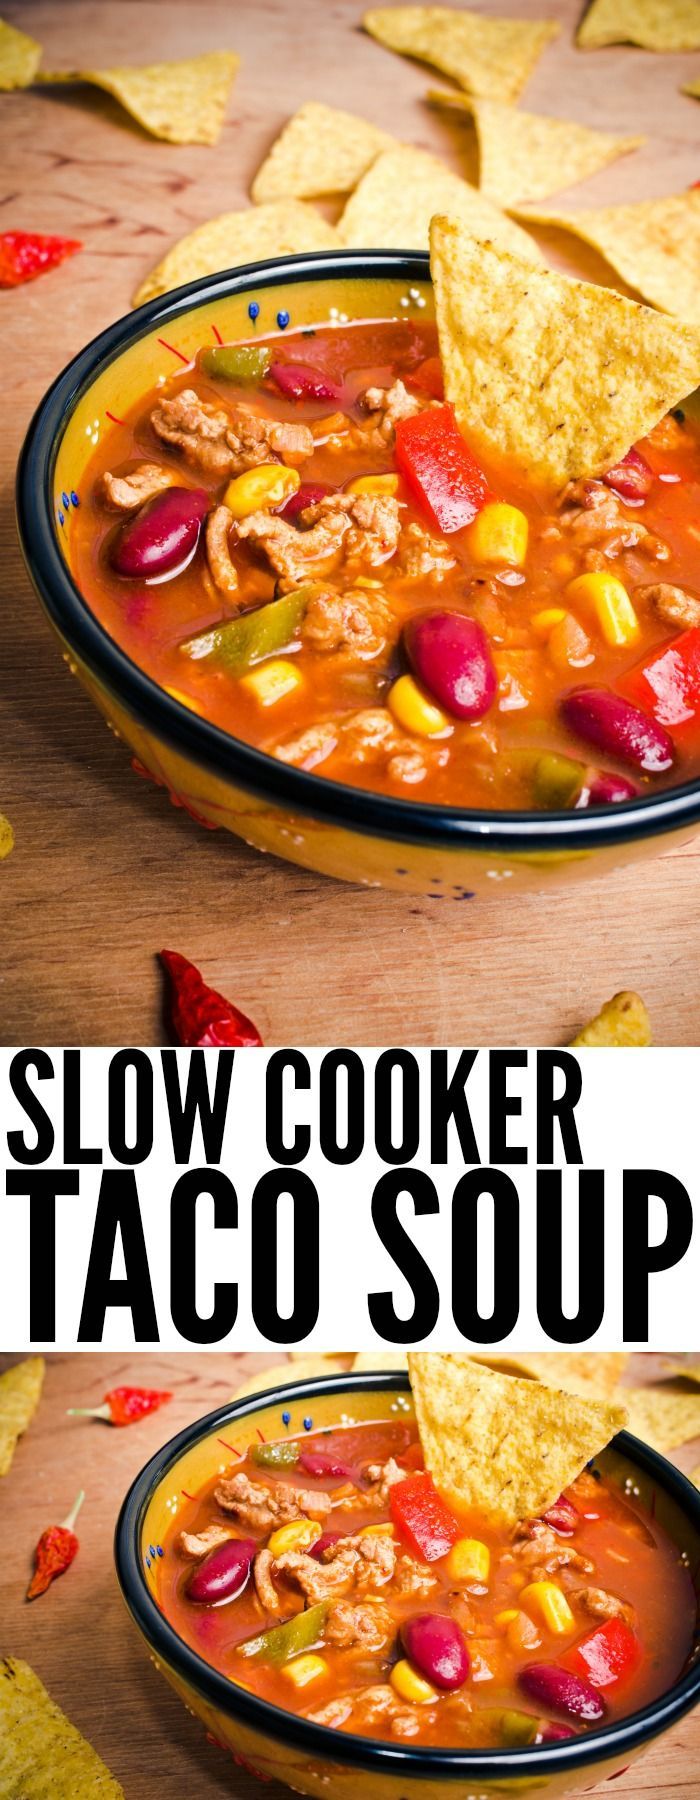 Taco Soup is a favorite. I put it in the crock pot early and we munch on it all day. If friends show up, this recipe makes a lot